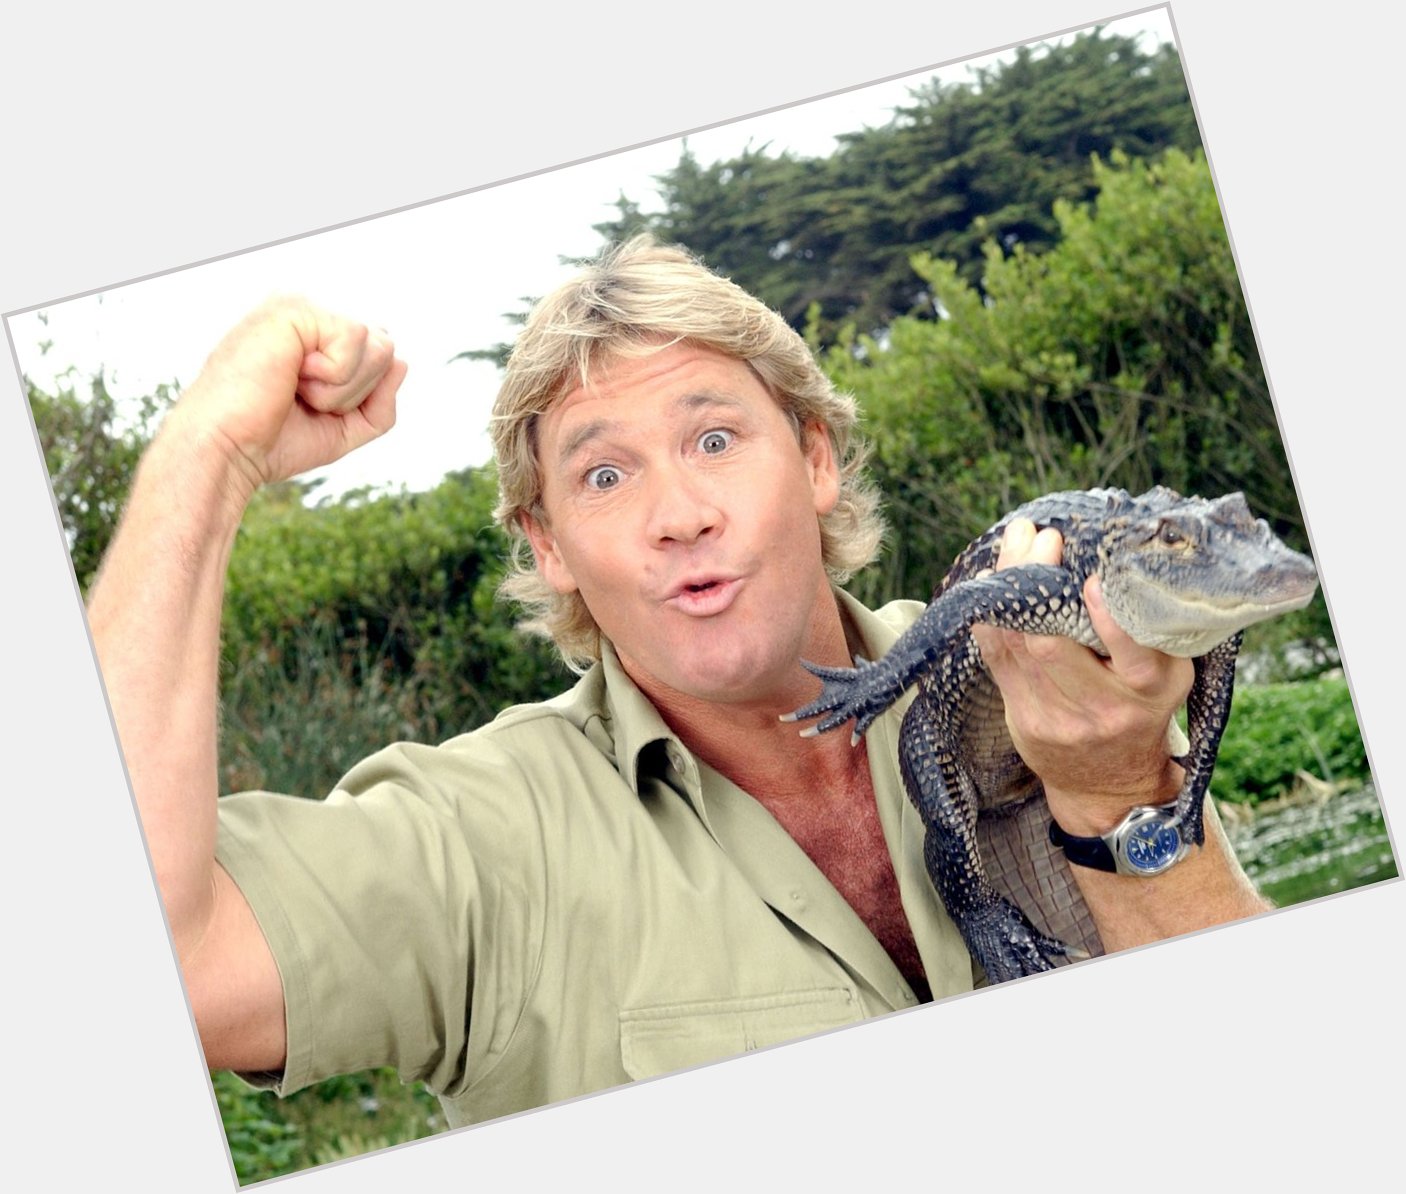 Happy 55th birthday to the guy who made me love nature, Steve Irwin. Rest in peace 